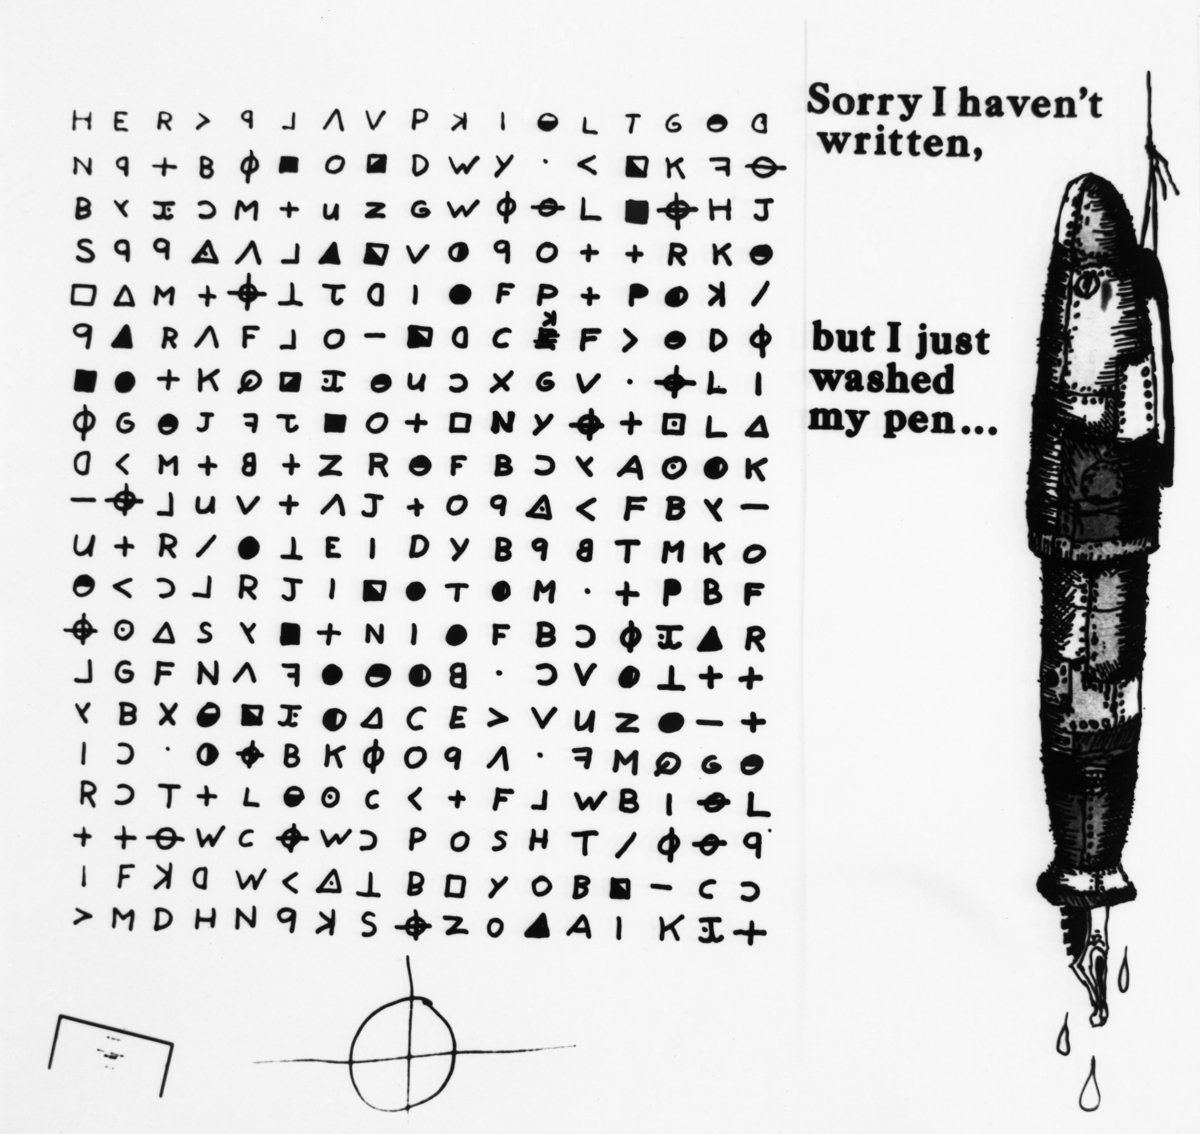 Some believe The Zodiac Killer was inspired by the comics